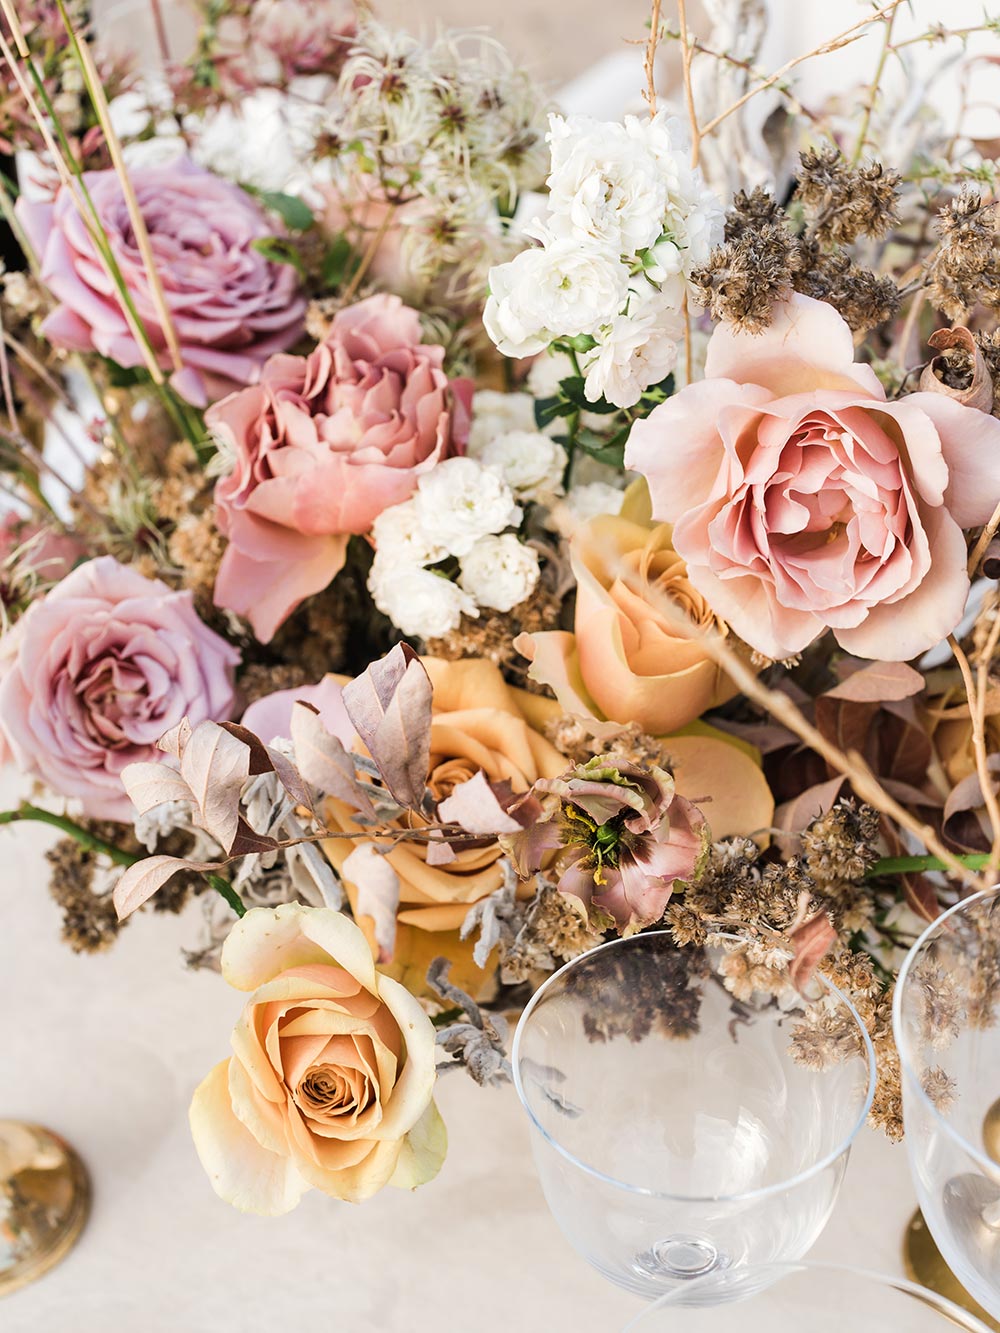 Ultra Luxe Wedding Inspiration with Glamorous Magenta Florals - Belle The  Magazine